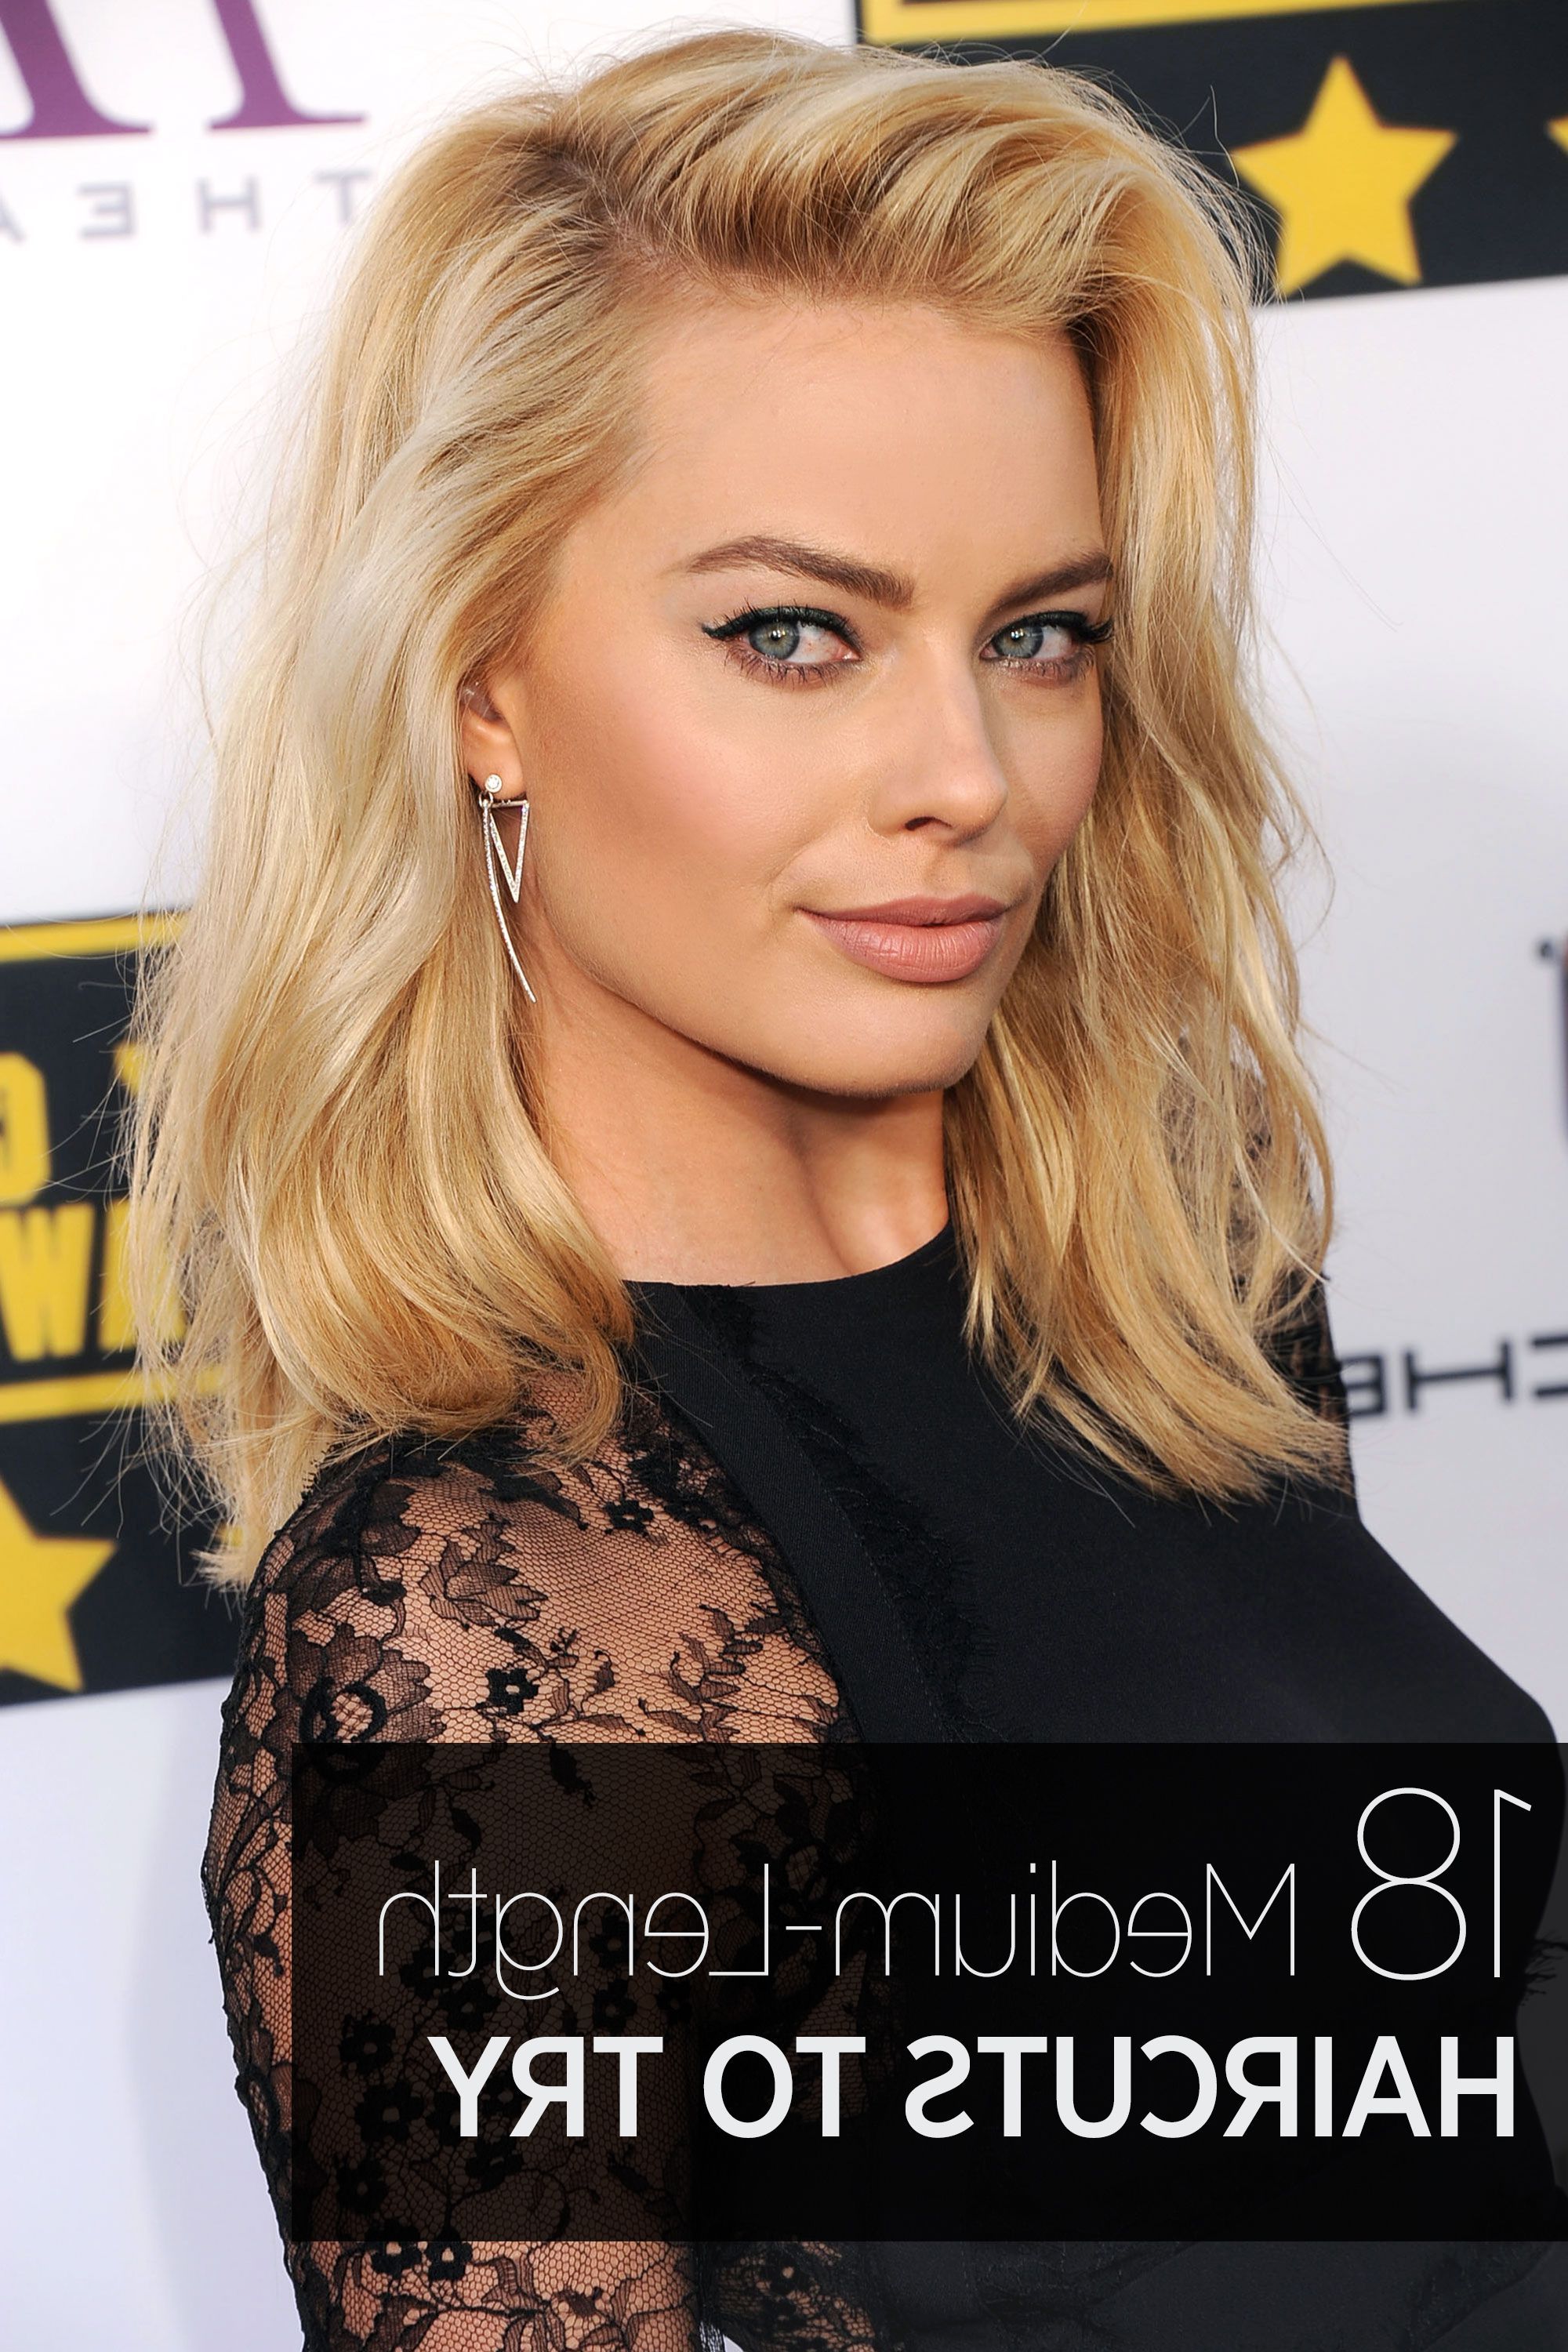 40 Best Medium Hairstyles – Celebrities With Shoulder Length Haircuts Pertaining To Short Medium Length Haircuts (View 9 of 25)